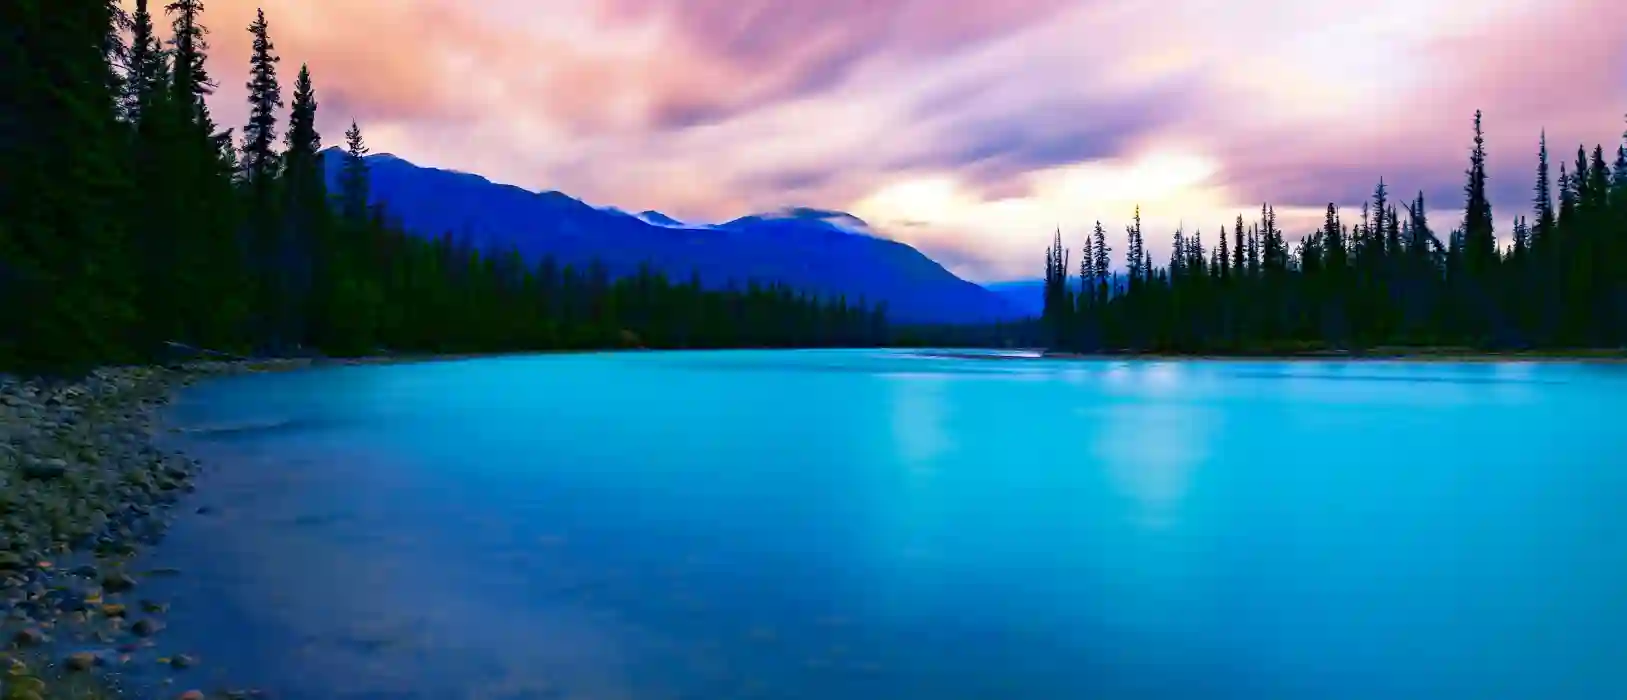 Beautiful pastel skies and blue lake gives the feeling of peace like TMS therapy can do for you.